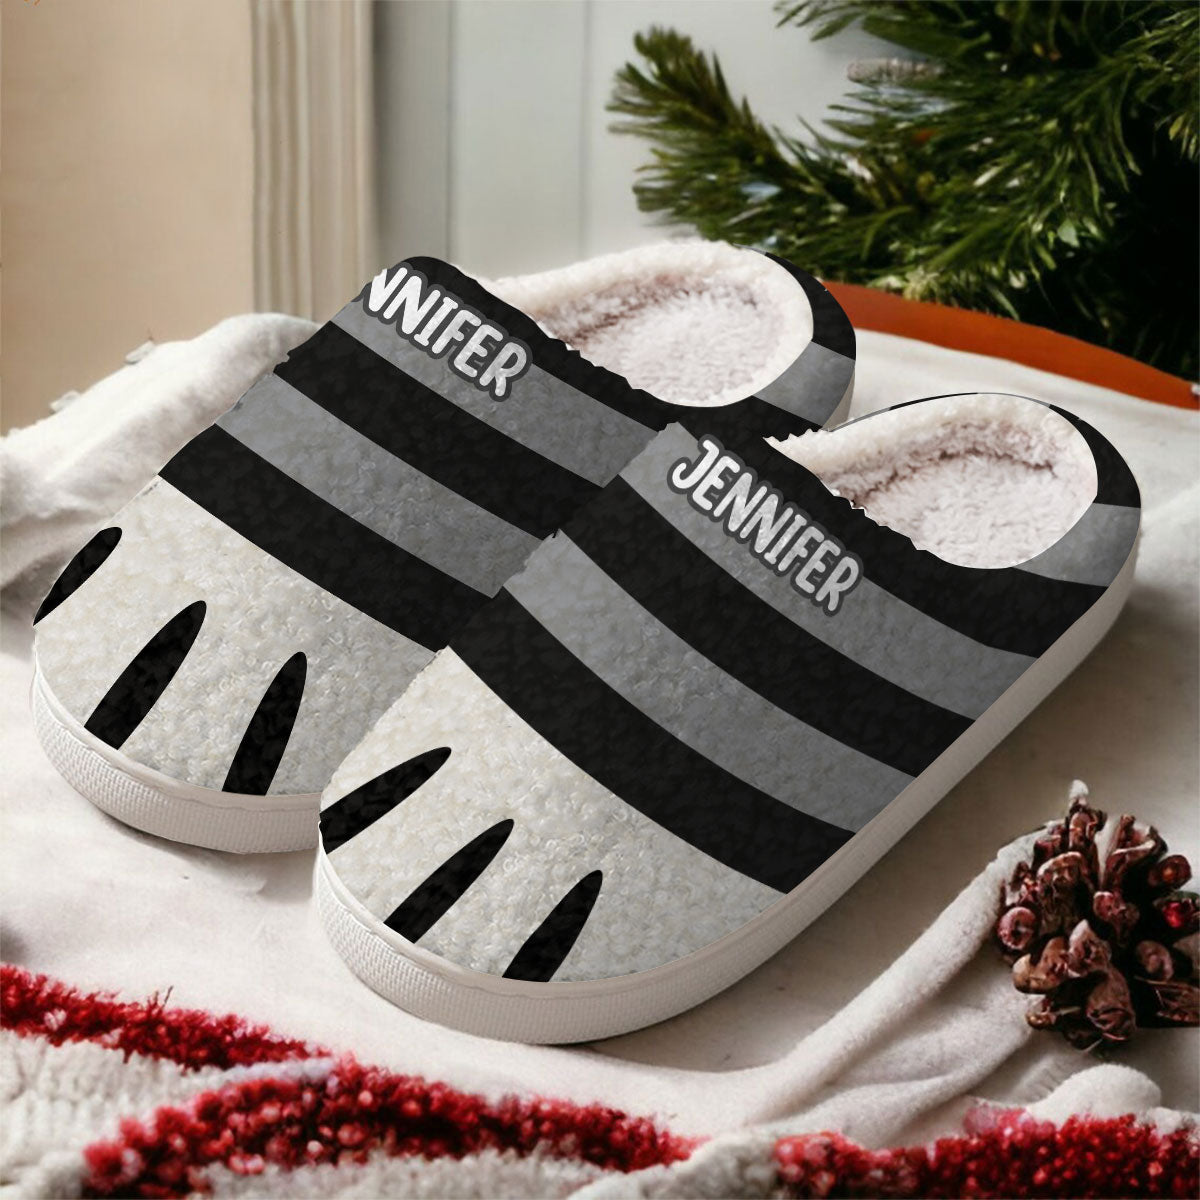 Discover Cute Cat Paws - Gift for cat lovers - Personalized Slippers